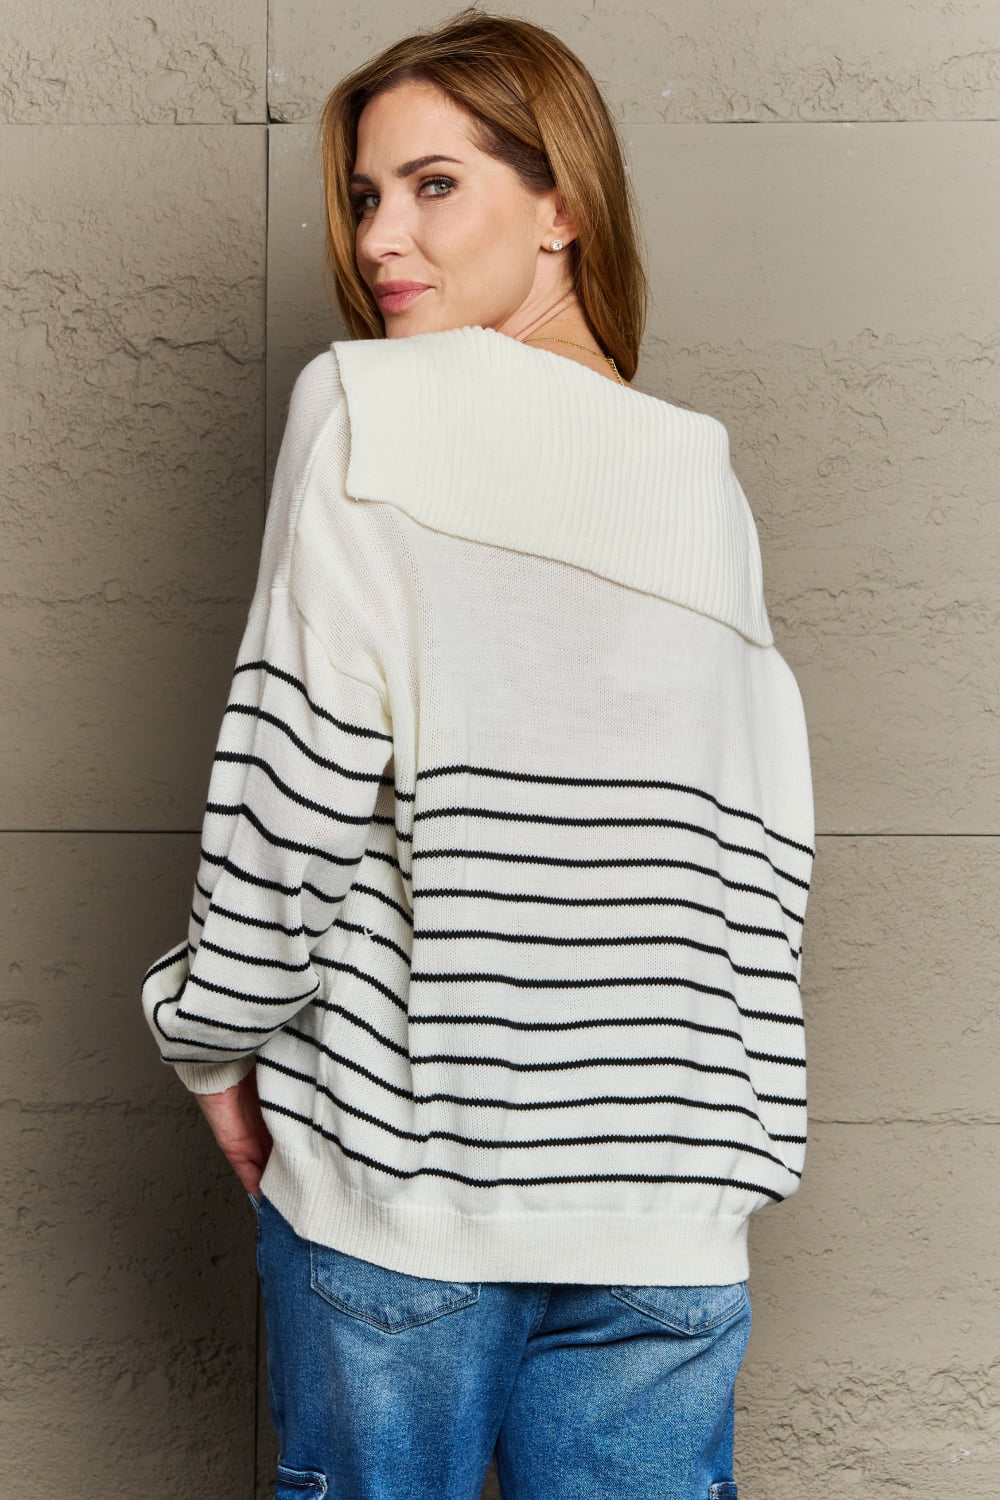 Make Me Smile Striped Oversized Knit Top - Women’s Clothing & Accessories - Shirts & Tops - 2 - 2024